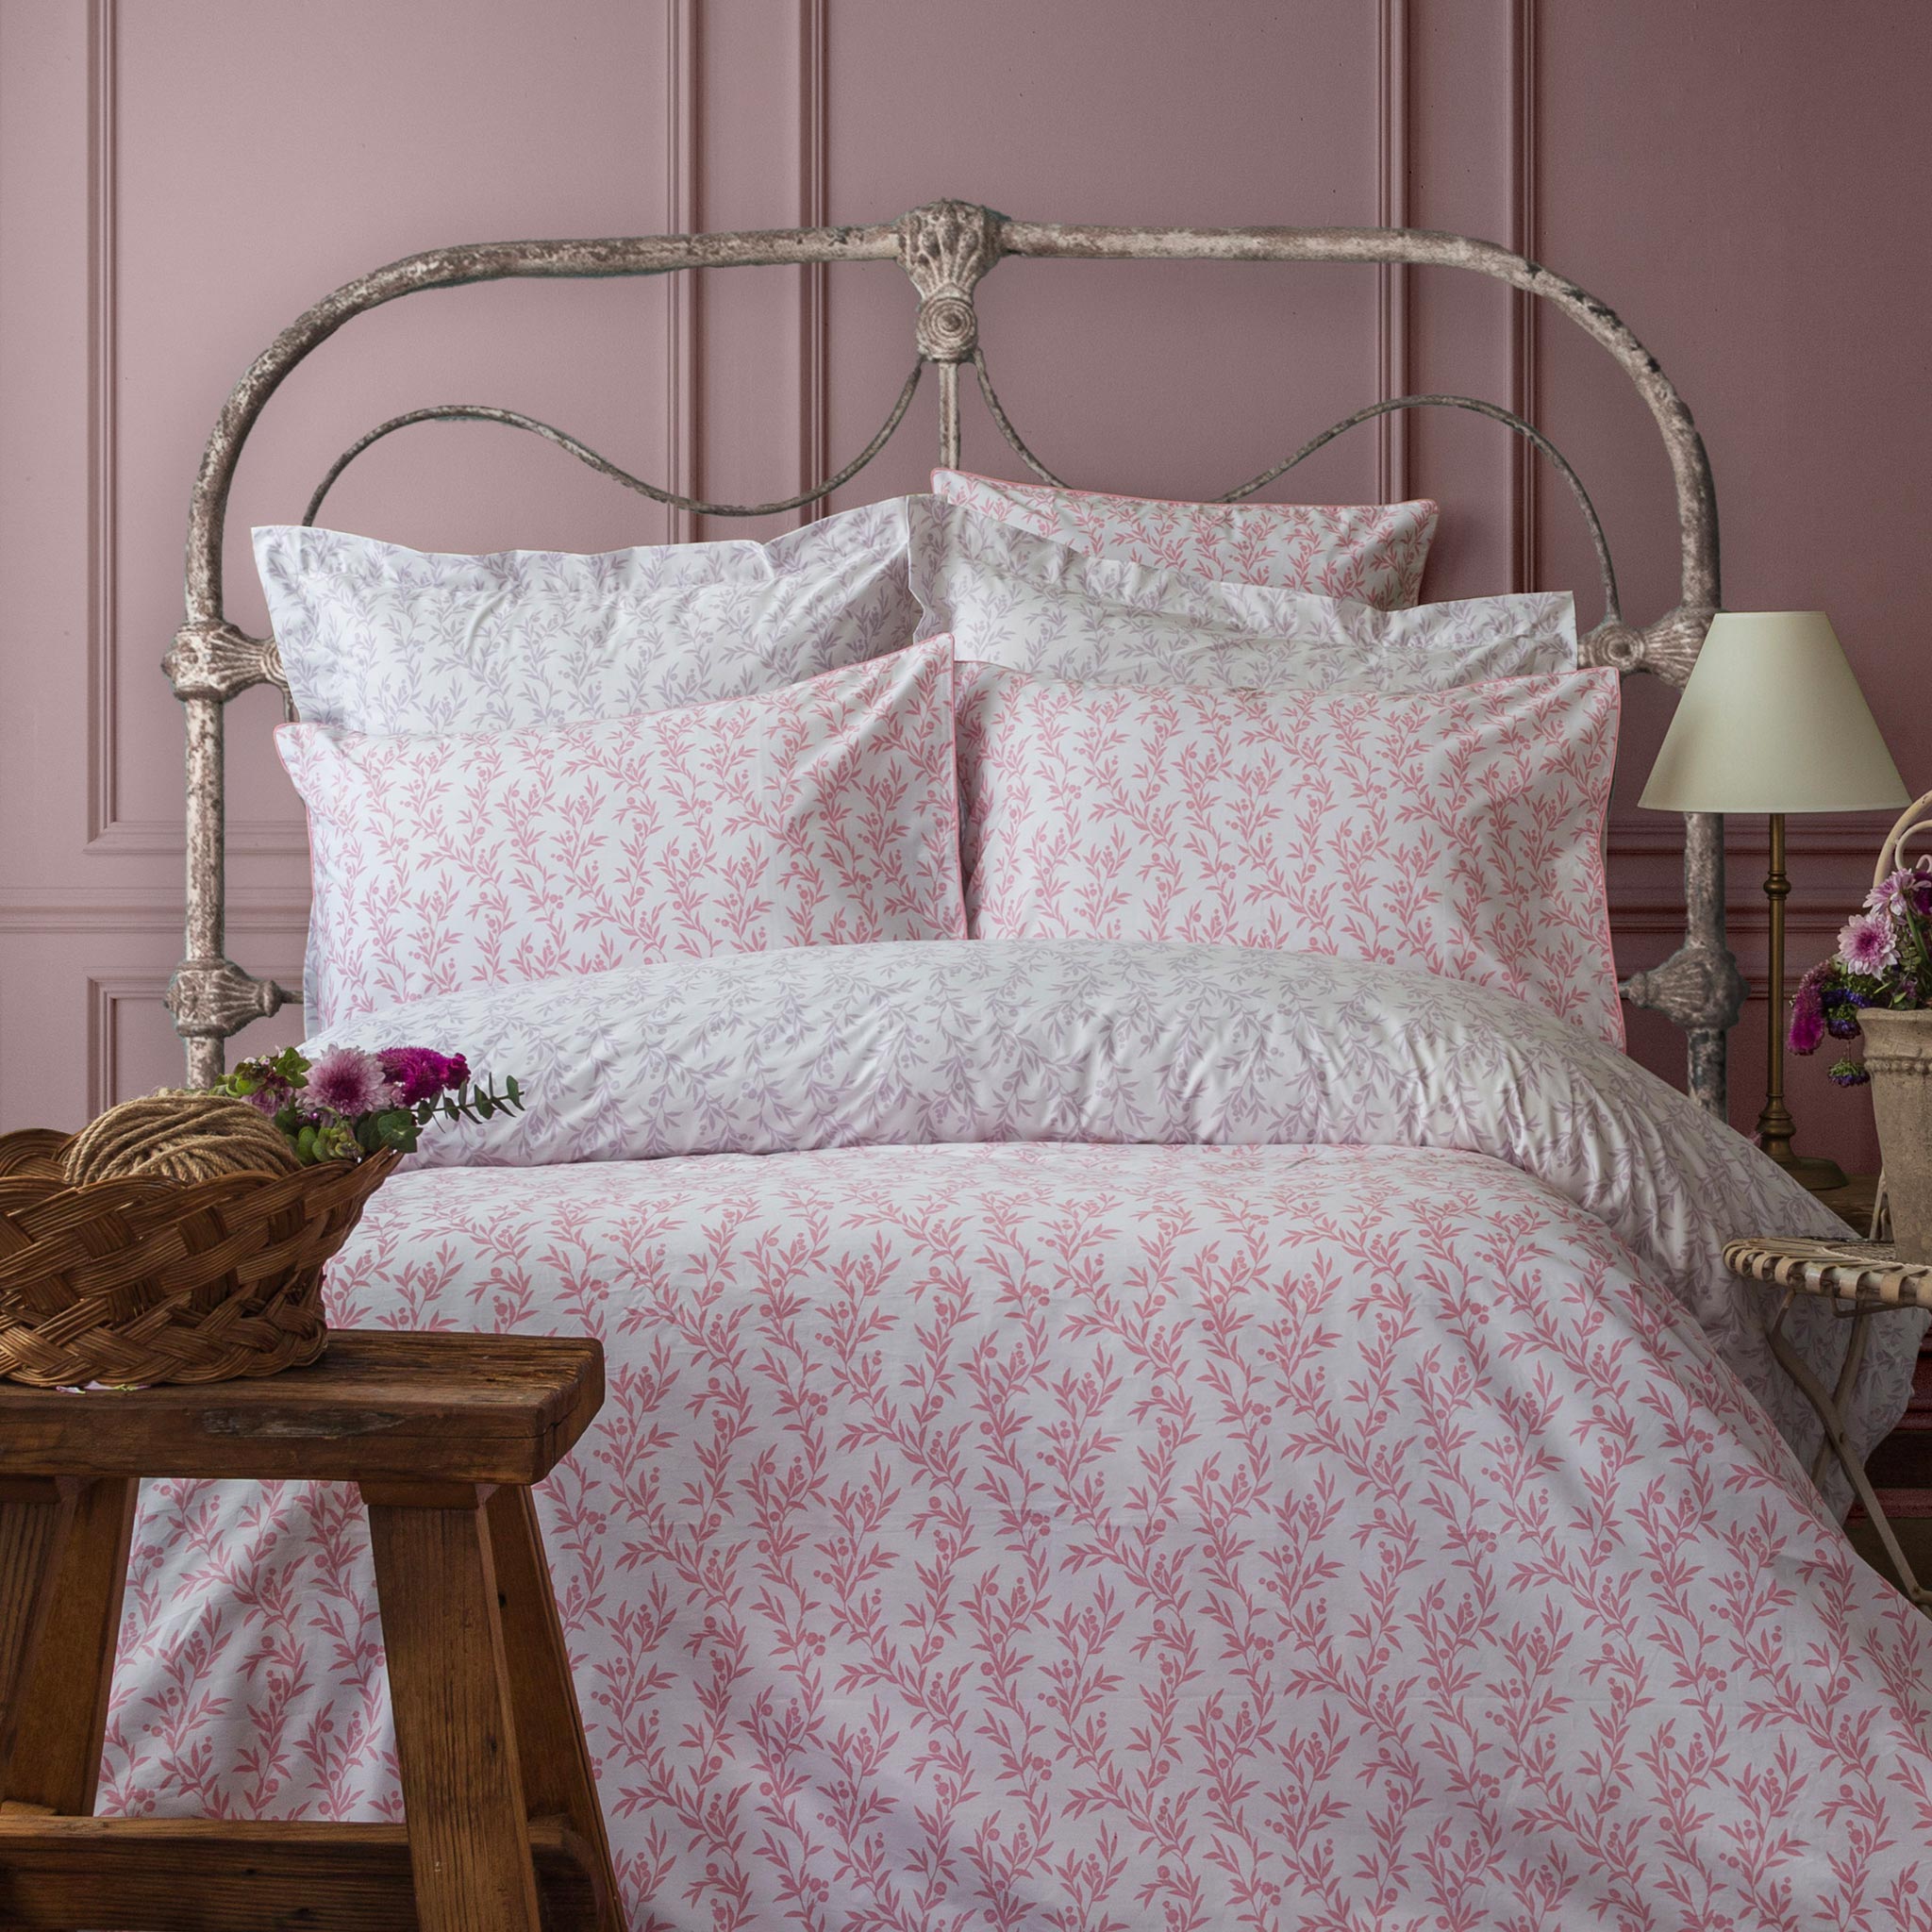 files/luxury-percale-bedding-lilac-pink-ditsy-floral-duvet-cover-set-1.jpg